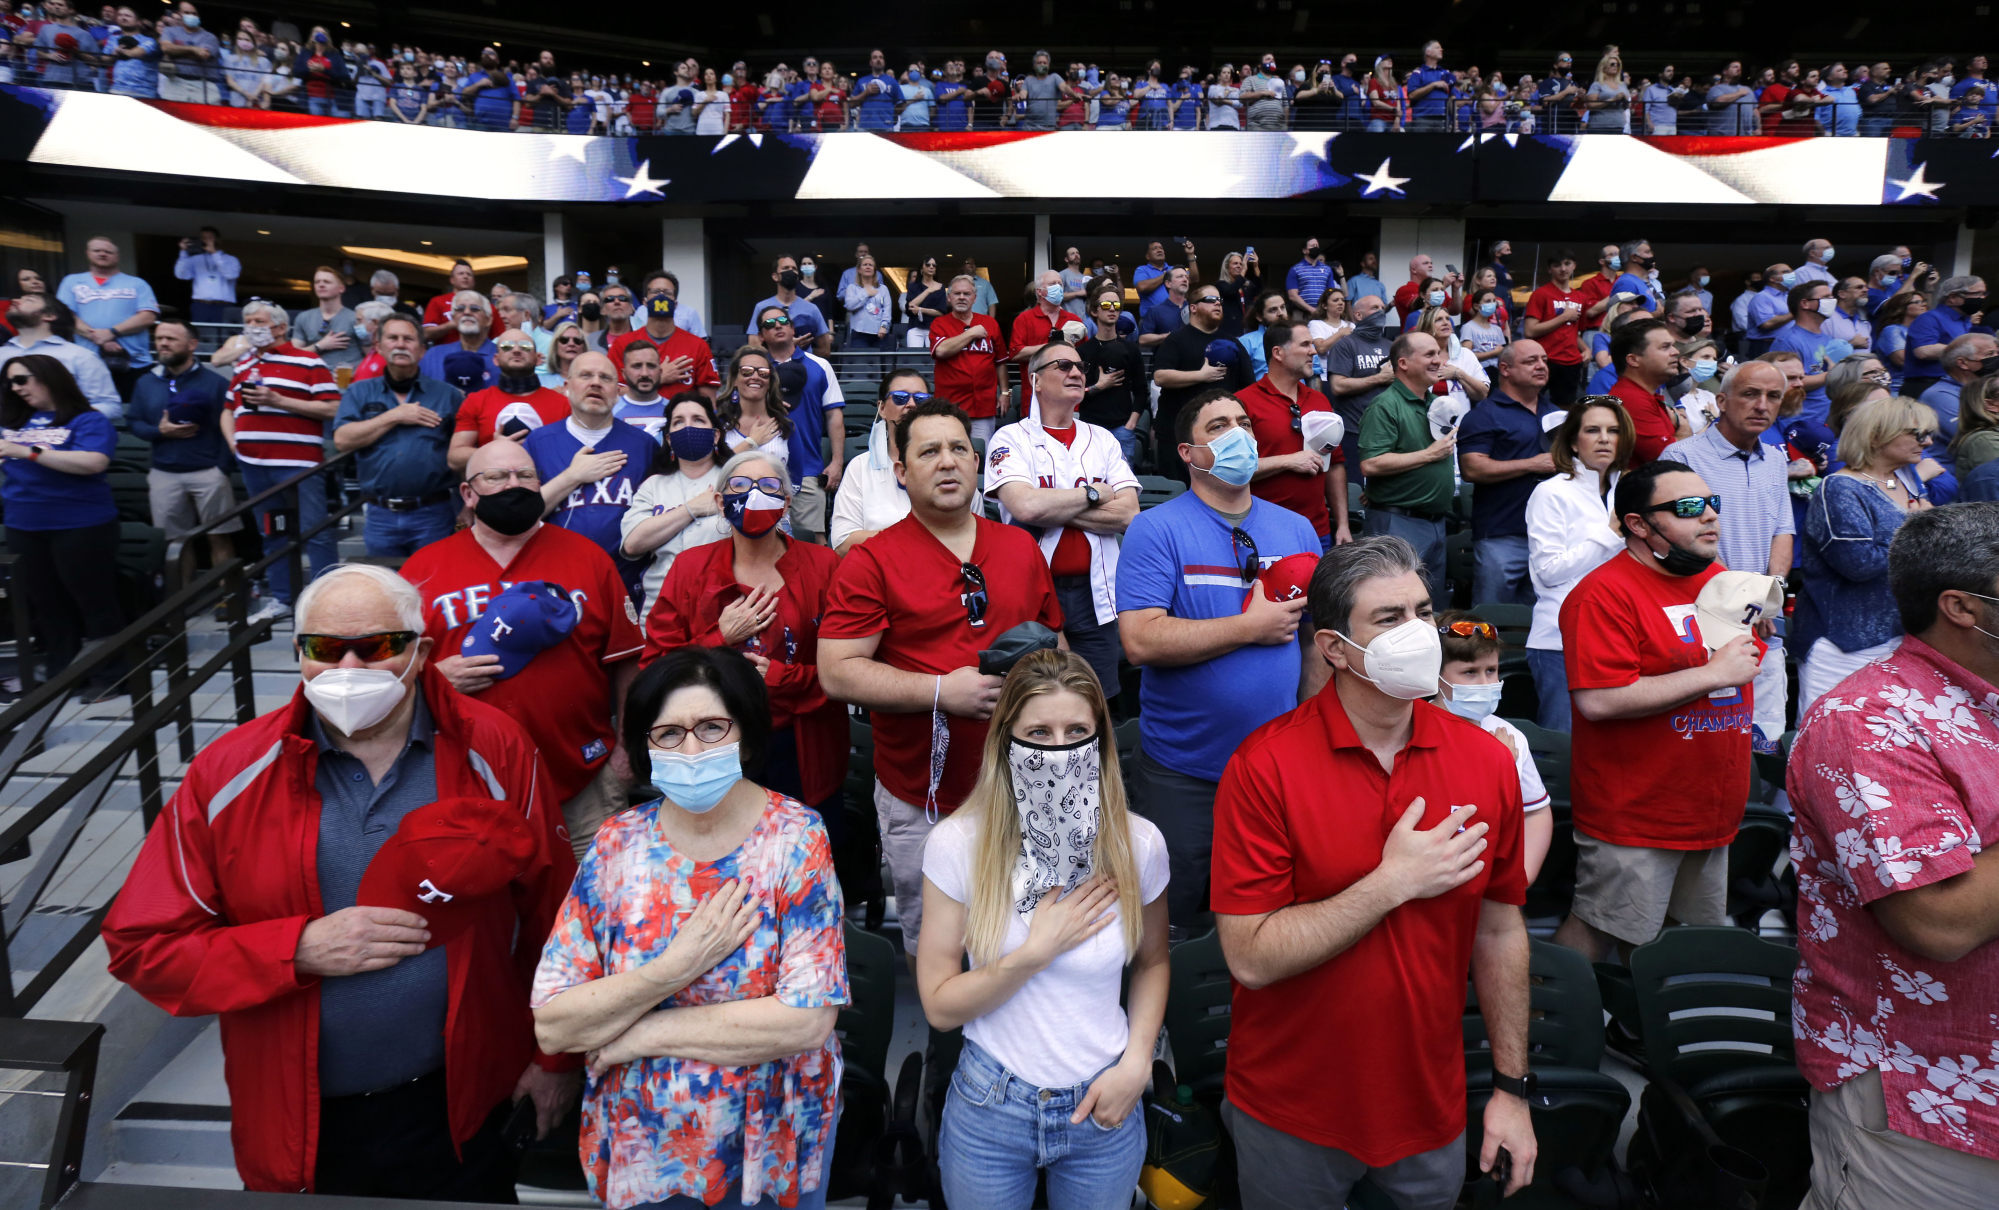 As COVID-19 ravages Texas, experts worry as Rangers, Astros mull fans